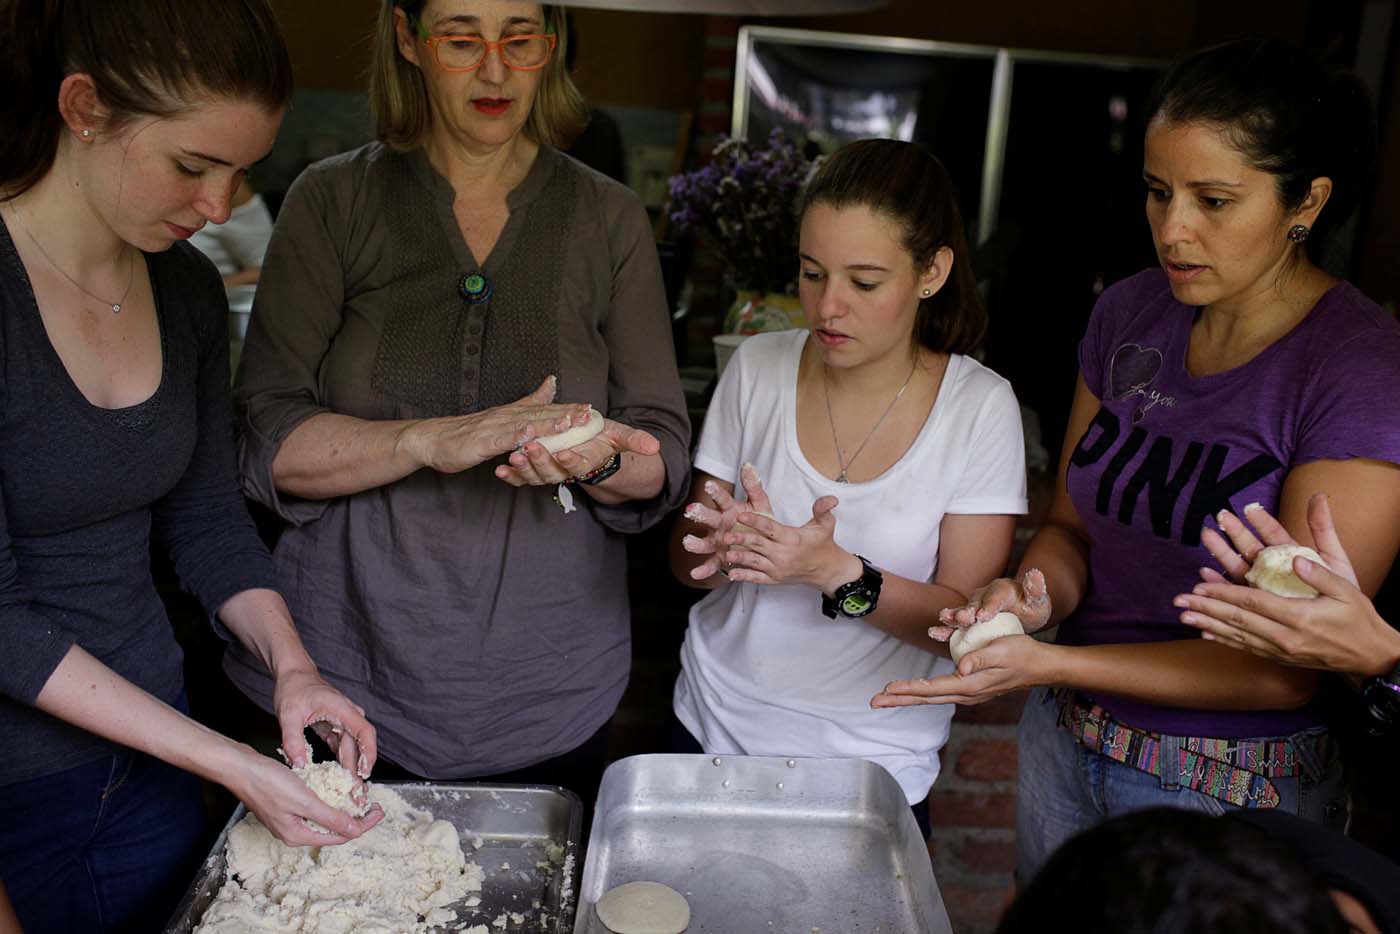 Volunteers of the Make The Difference (Haz La Diferencia) charity initiative prepare arepas to be donated, at the home kitchen of one of the volunteers in Caracas, Venezuela March 5, 2017. Picture taken March 5, 2017. REUTERS/Marco Bello